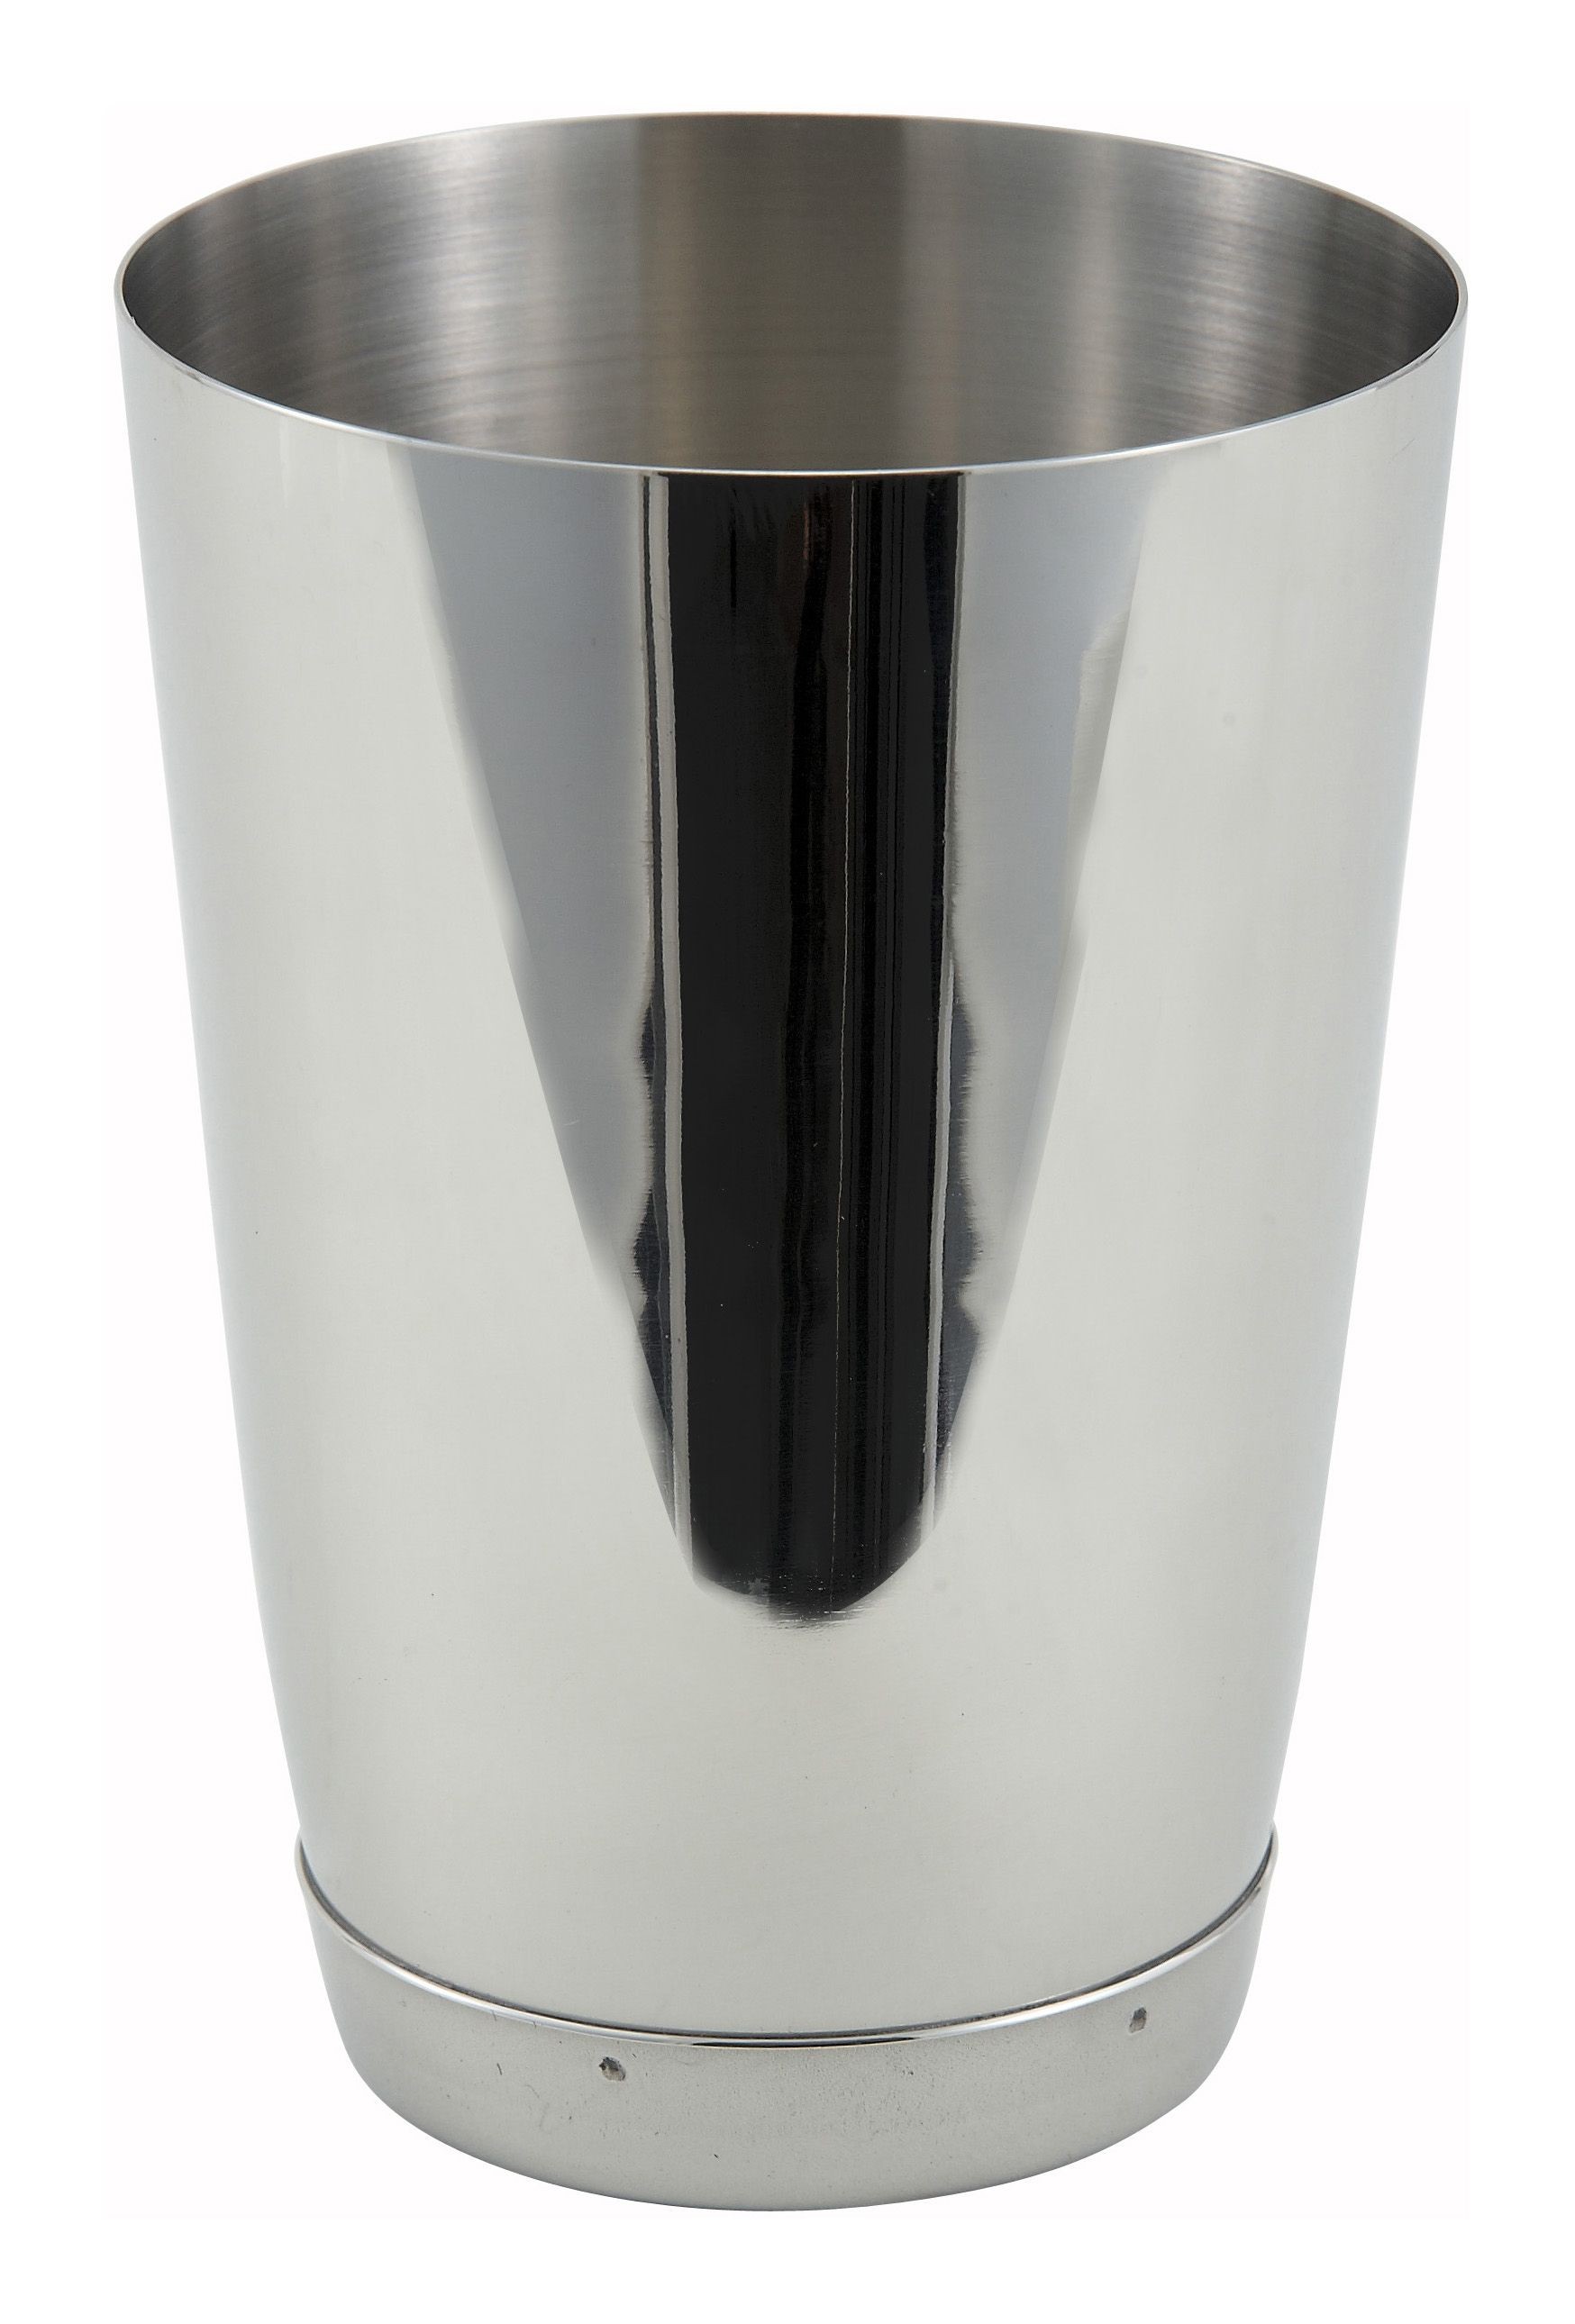 Tablecraft 375 3-Piece Stainless Steel Cocktail Shaker 8-Ounce